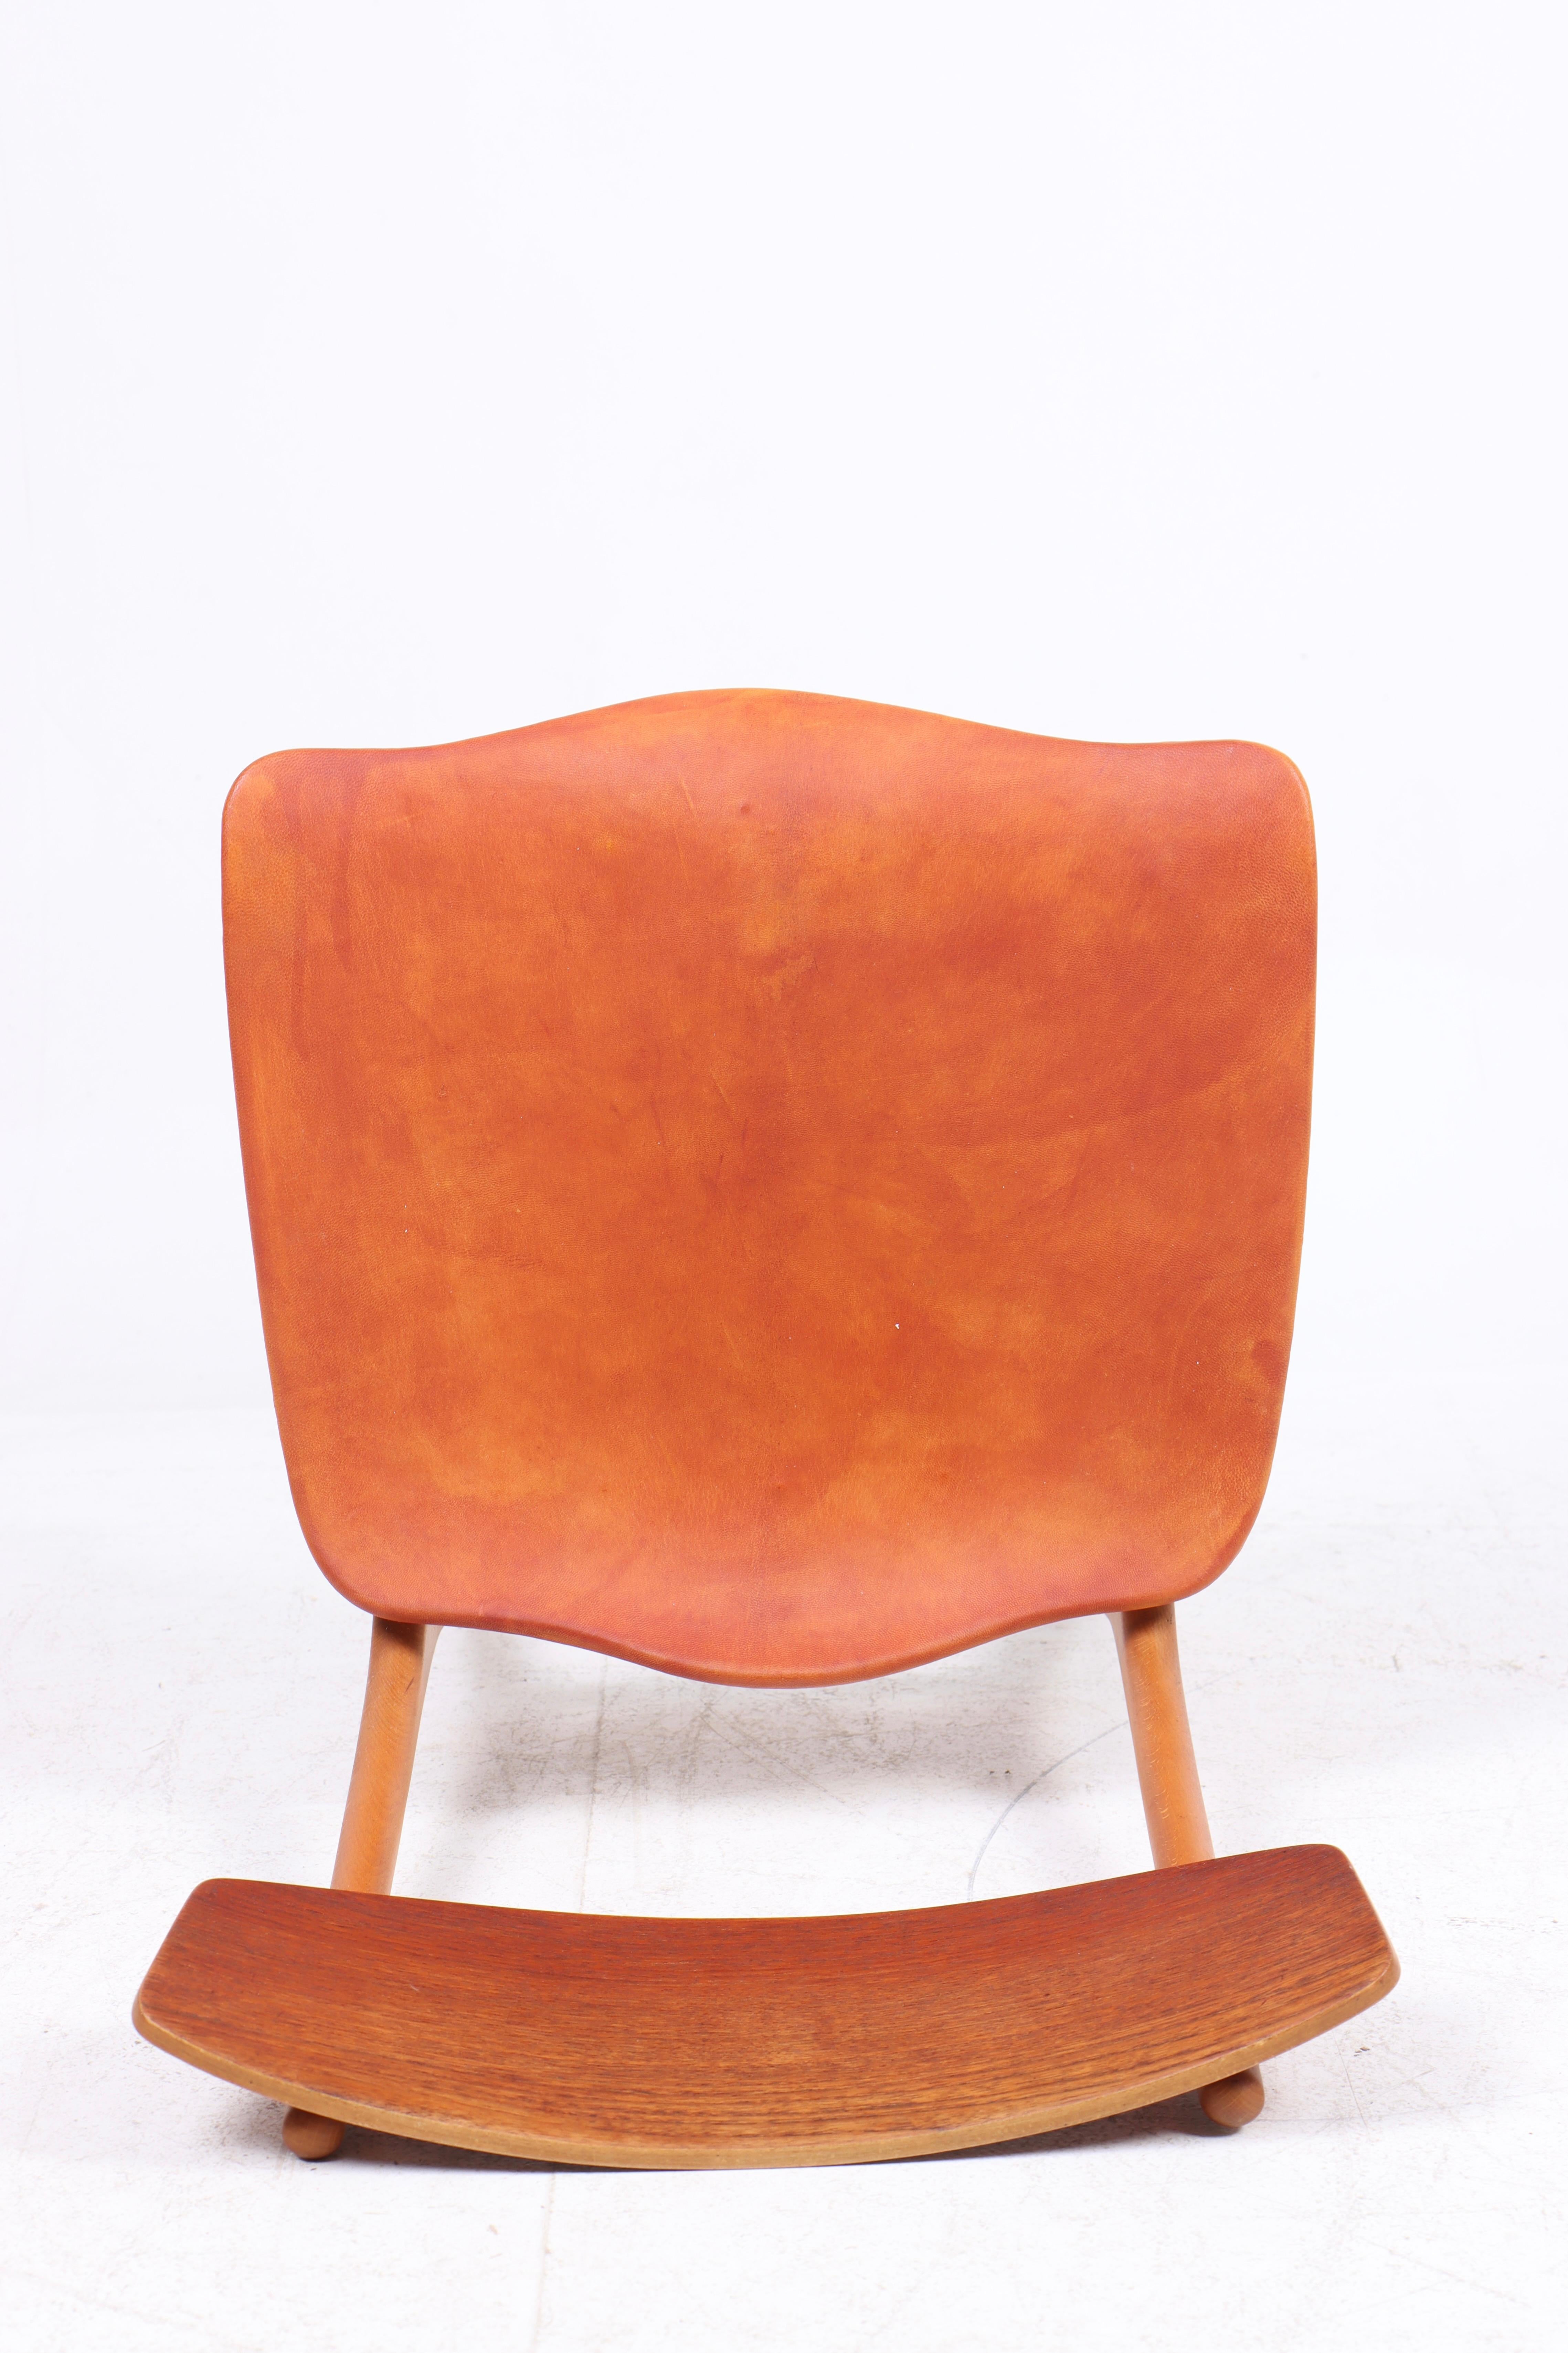 Set of Four Side Chairs in Teak and Leather, Danish Design, 1960s For Sale 6